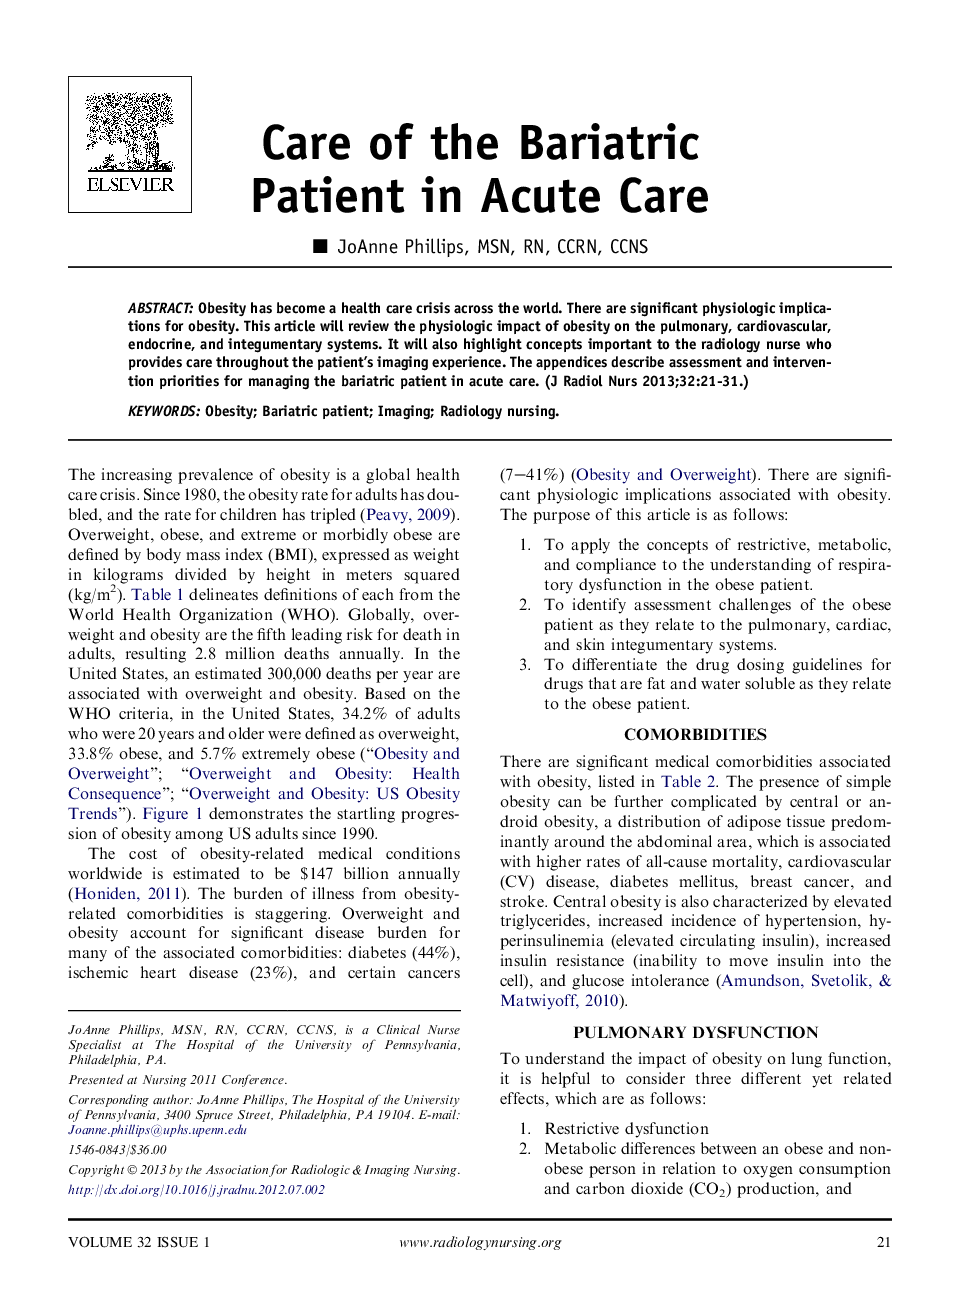 Care of the Bariatric Patient in Acute Care